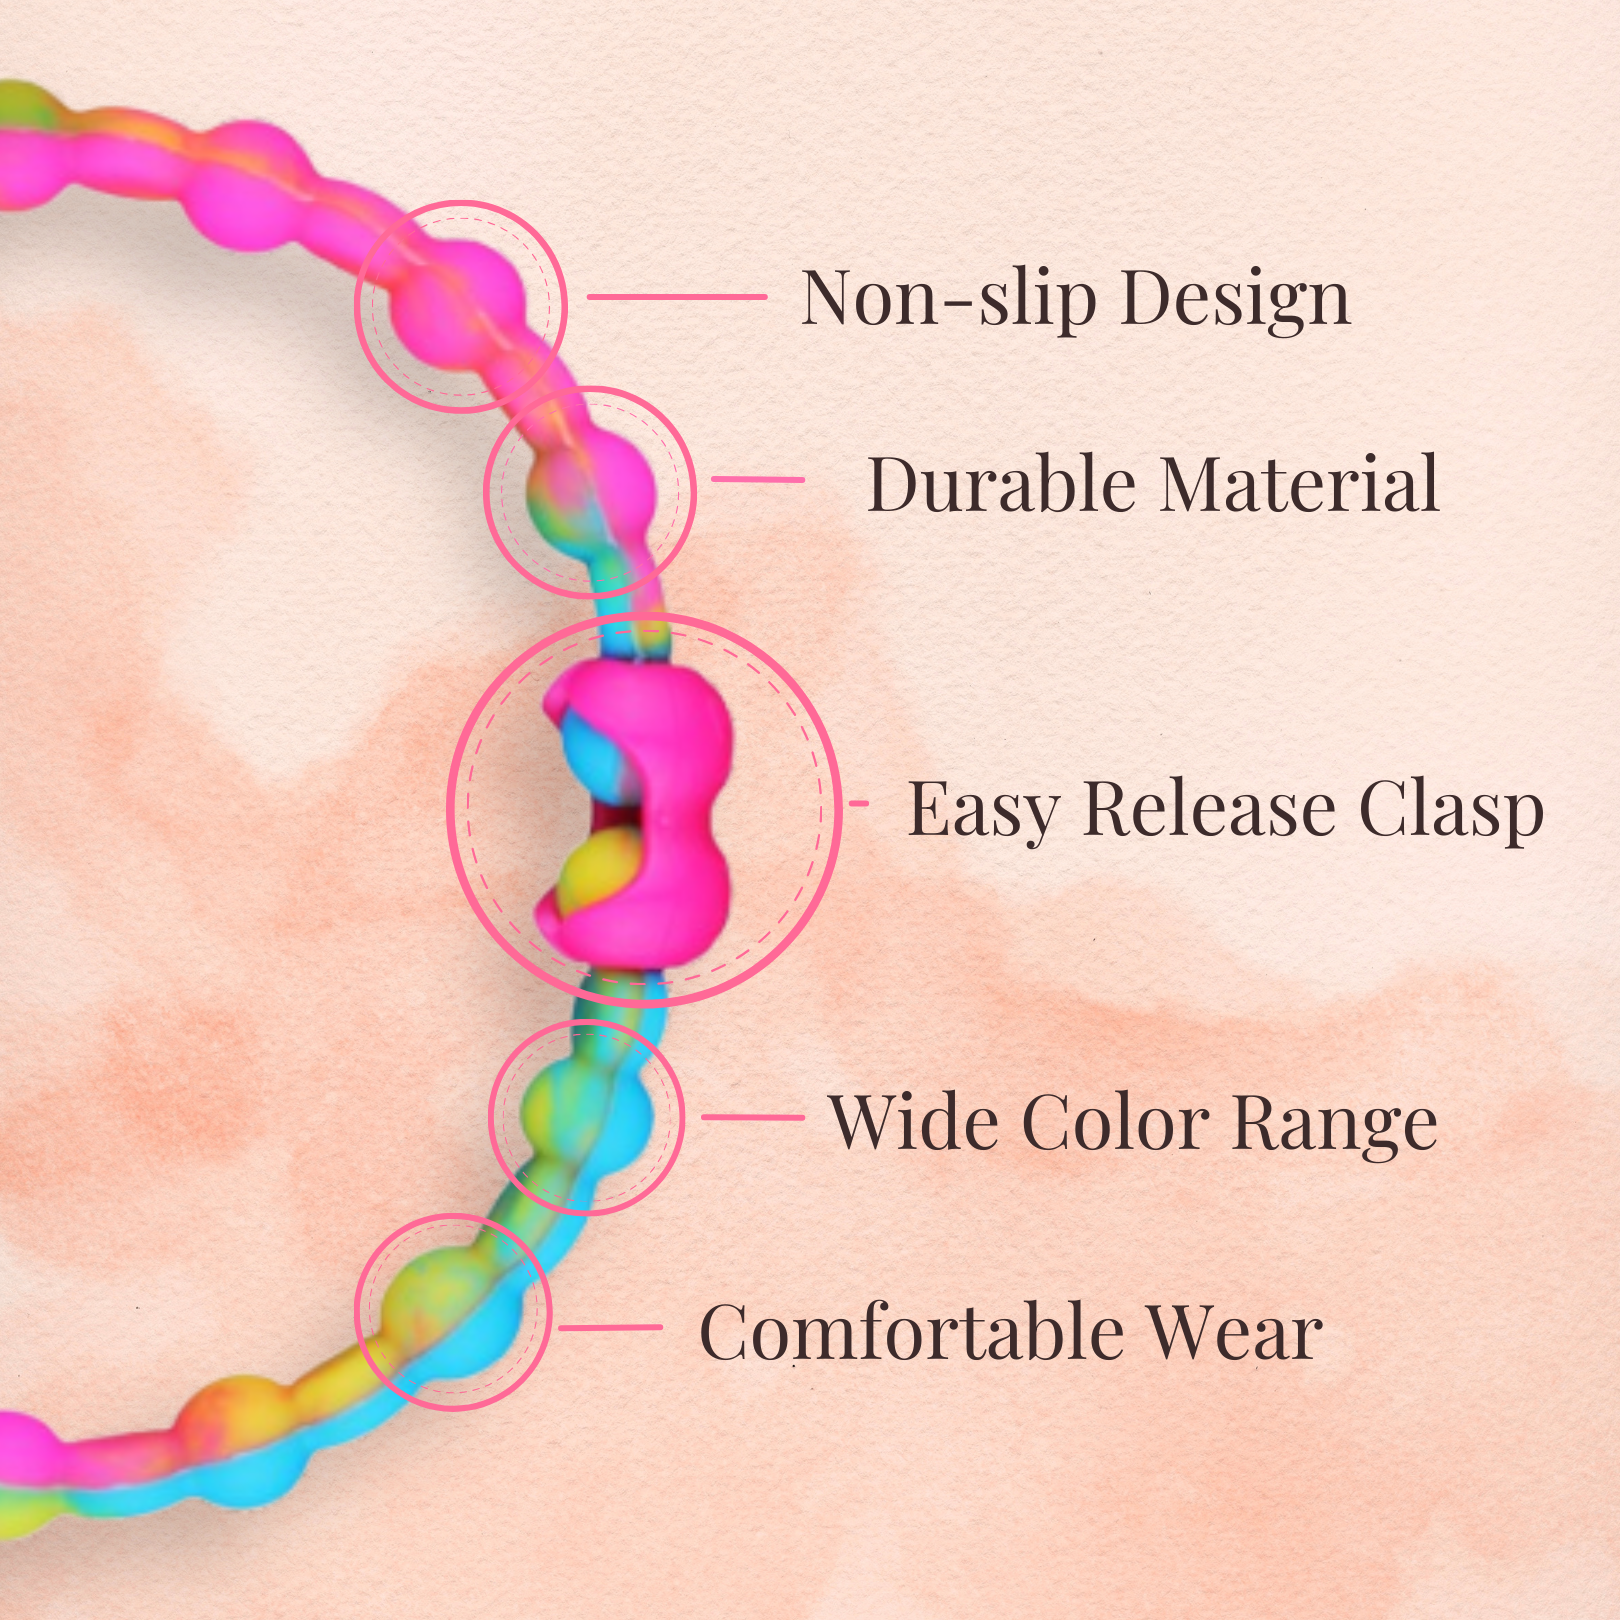 Arctic Aurora Pack PRO Hair Ties: Easy Release Adjustable for Every Hair Type PACK OF 8